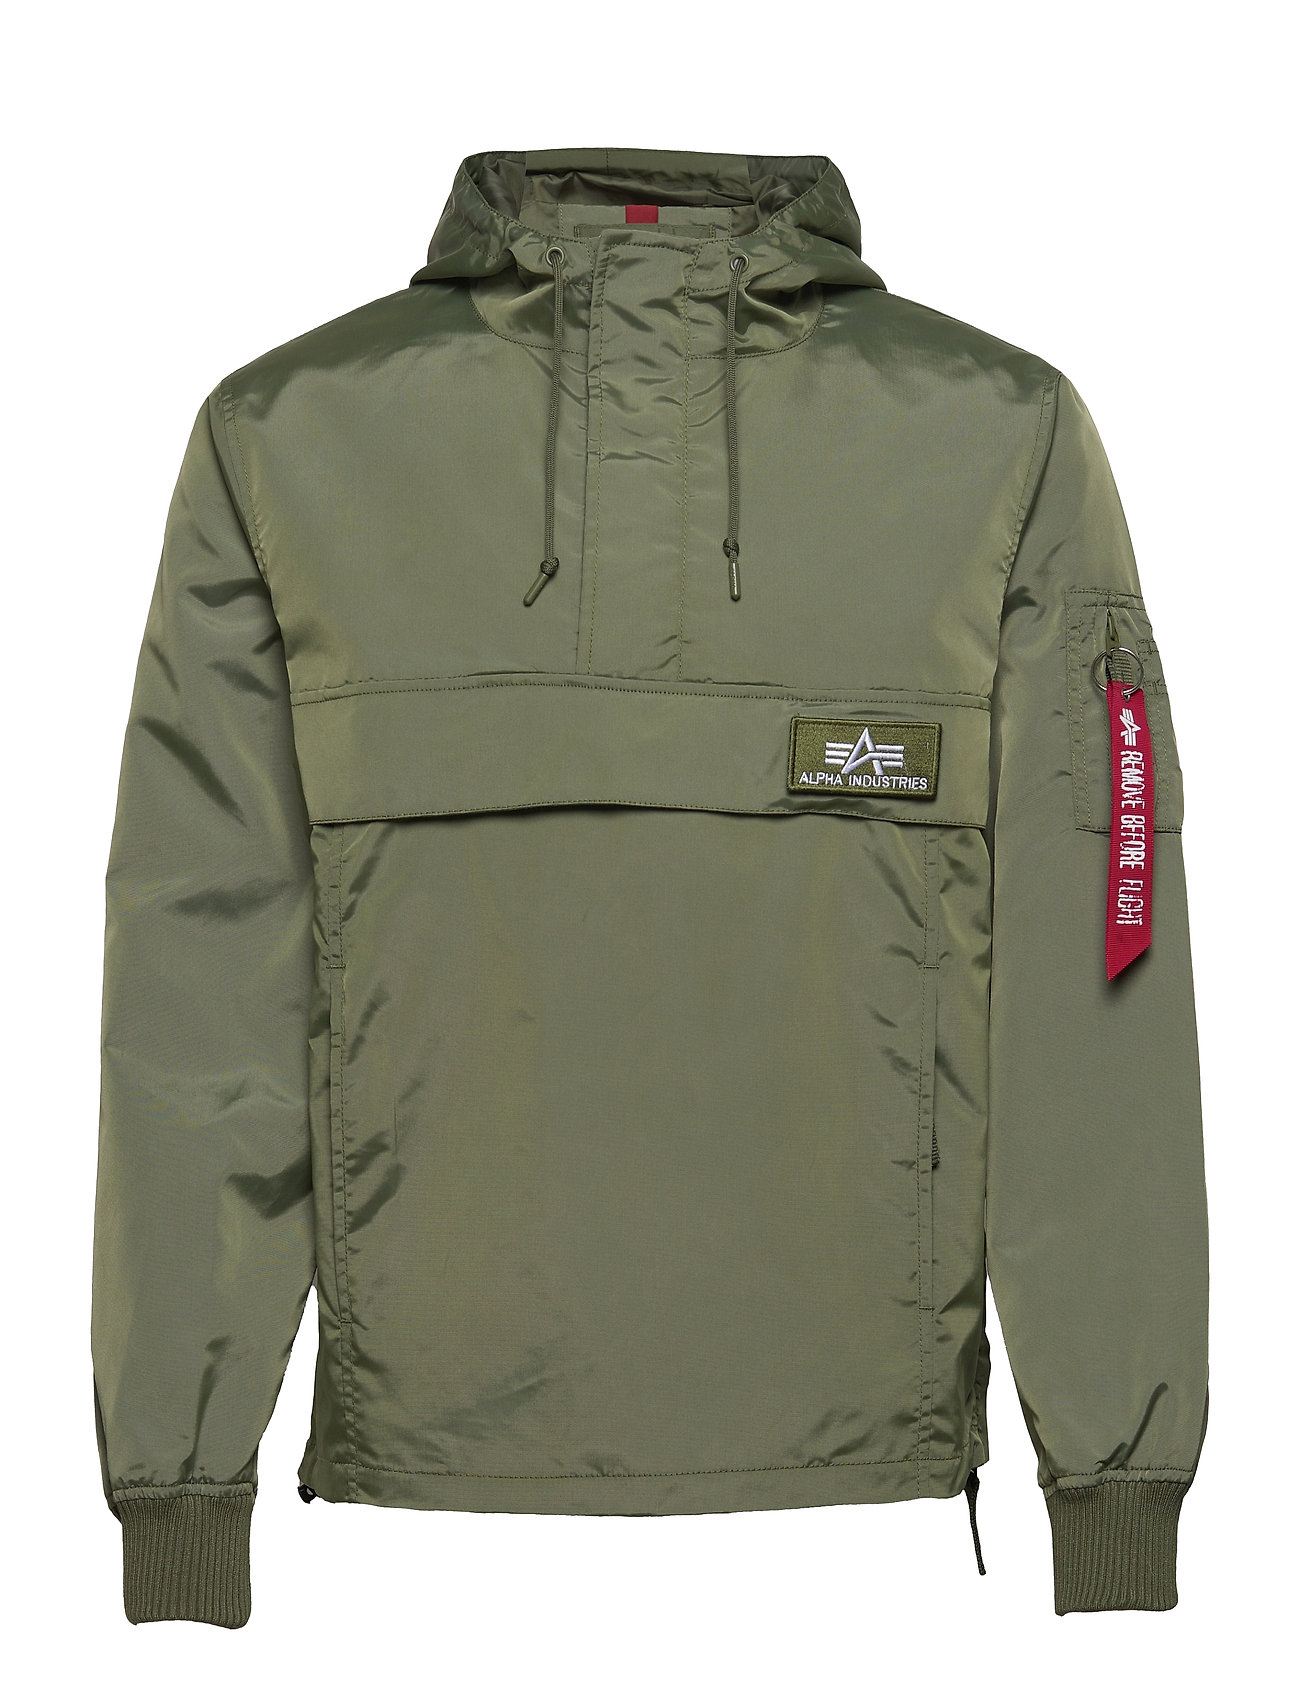 Alpha Industries Tt €. Alpha online easy from 140 at - Boozt.com. Fast and Anorak Anorak Industries Lw returns Buy delivery